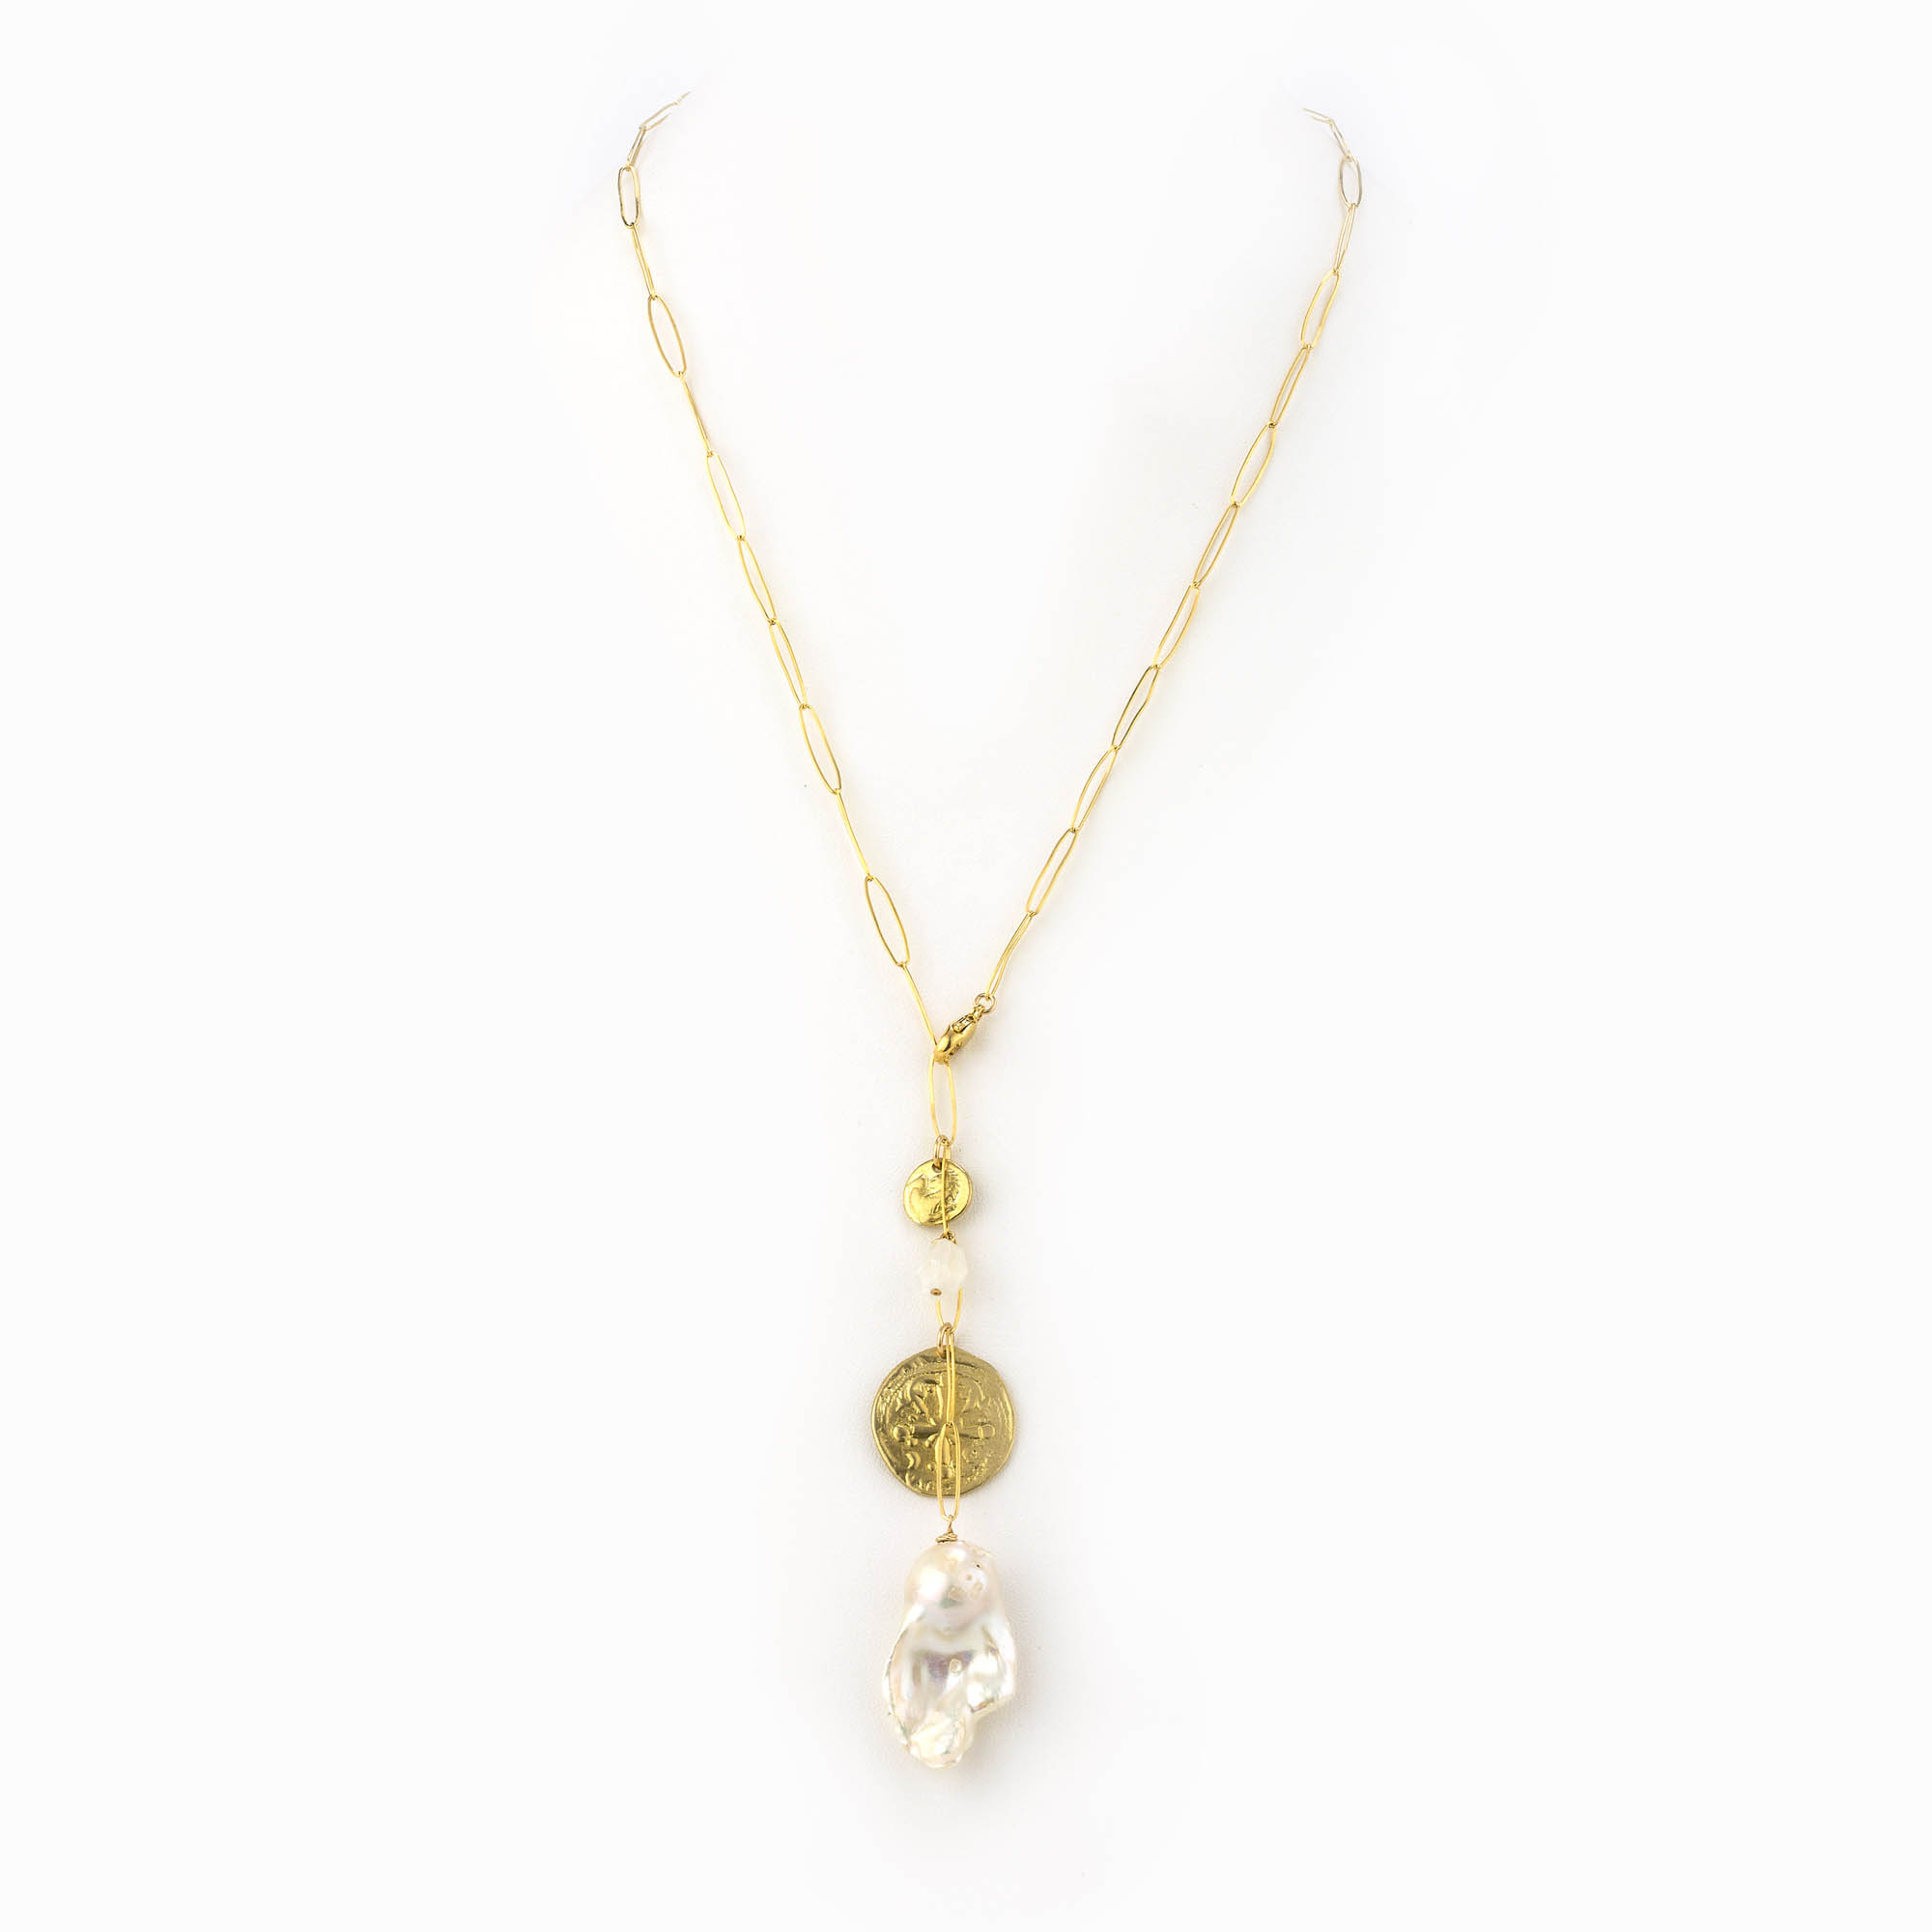 Featured image for “Atlas Gold Necklace”